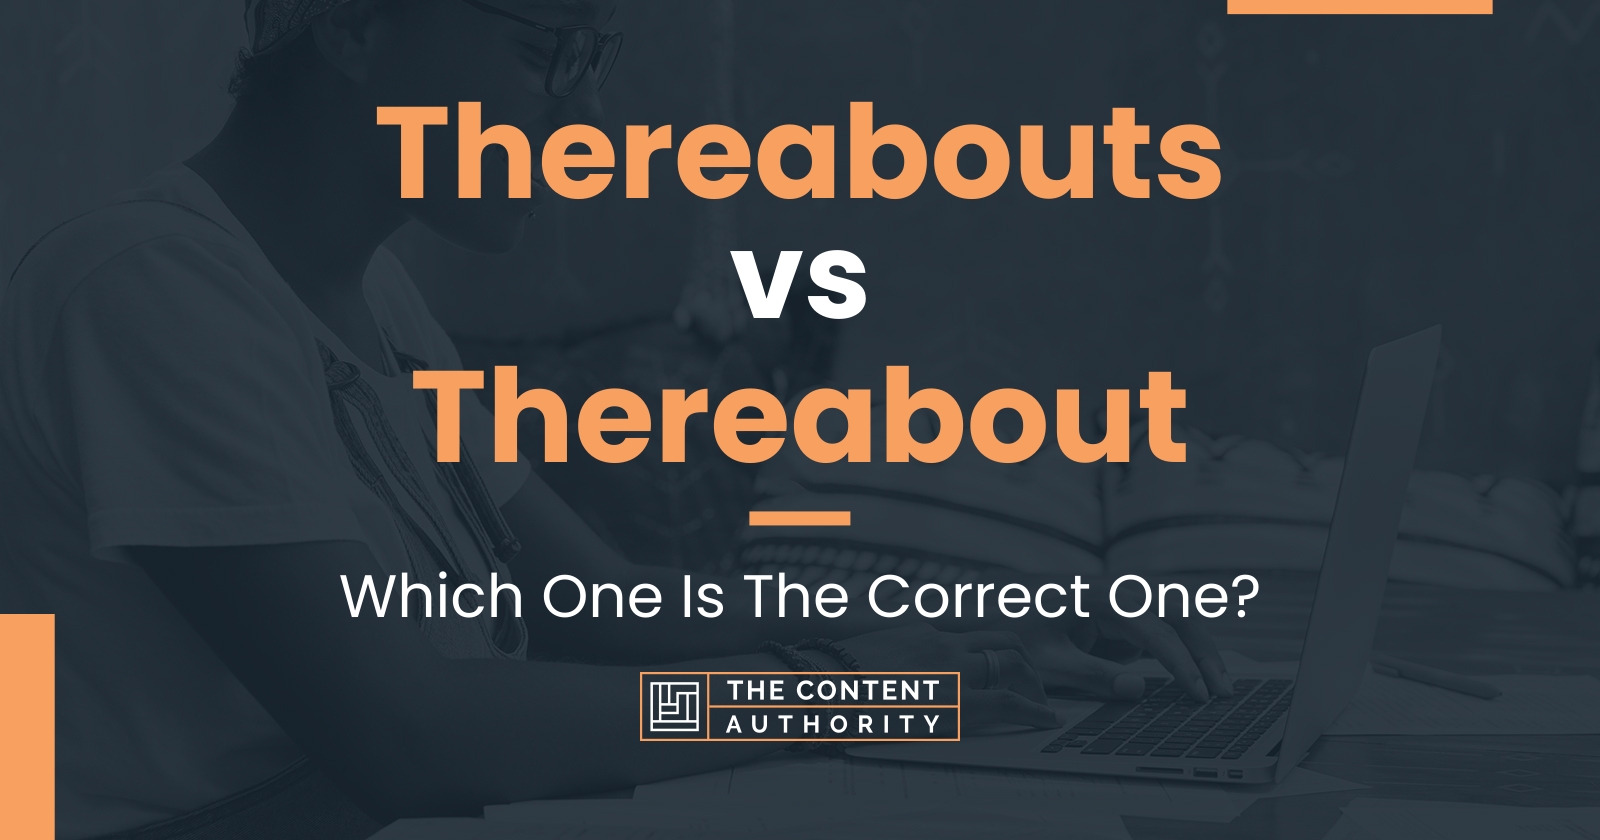 Thereabouts vs Thereabout: Which One Is The Correct One?